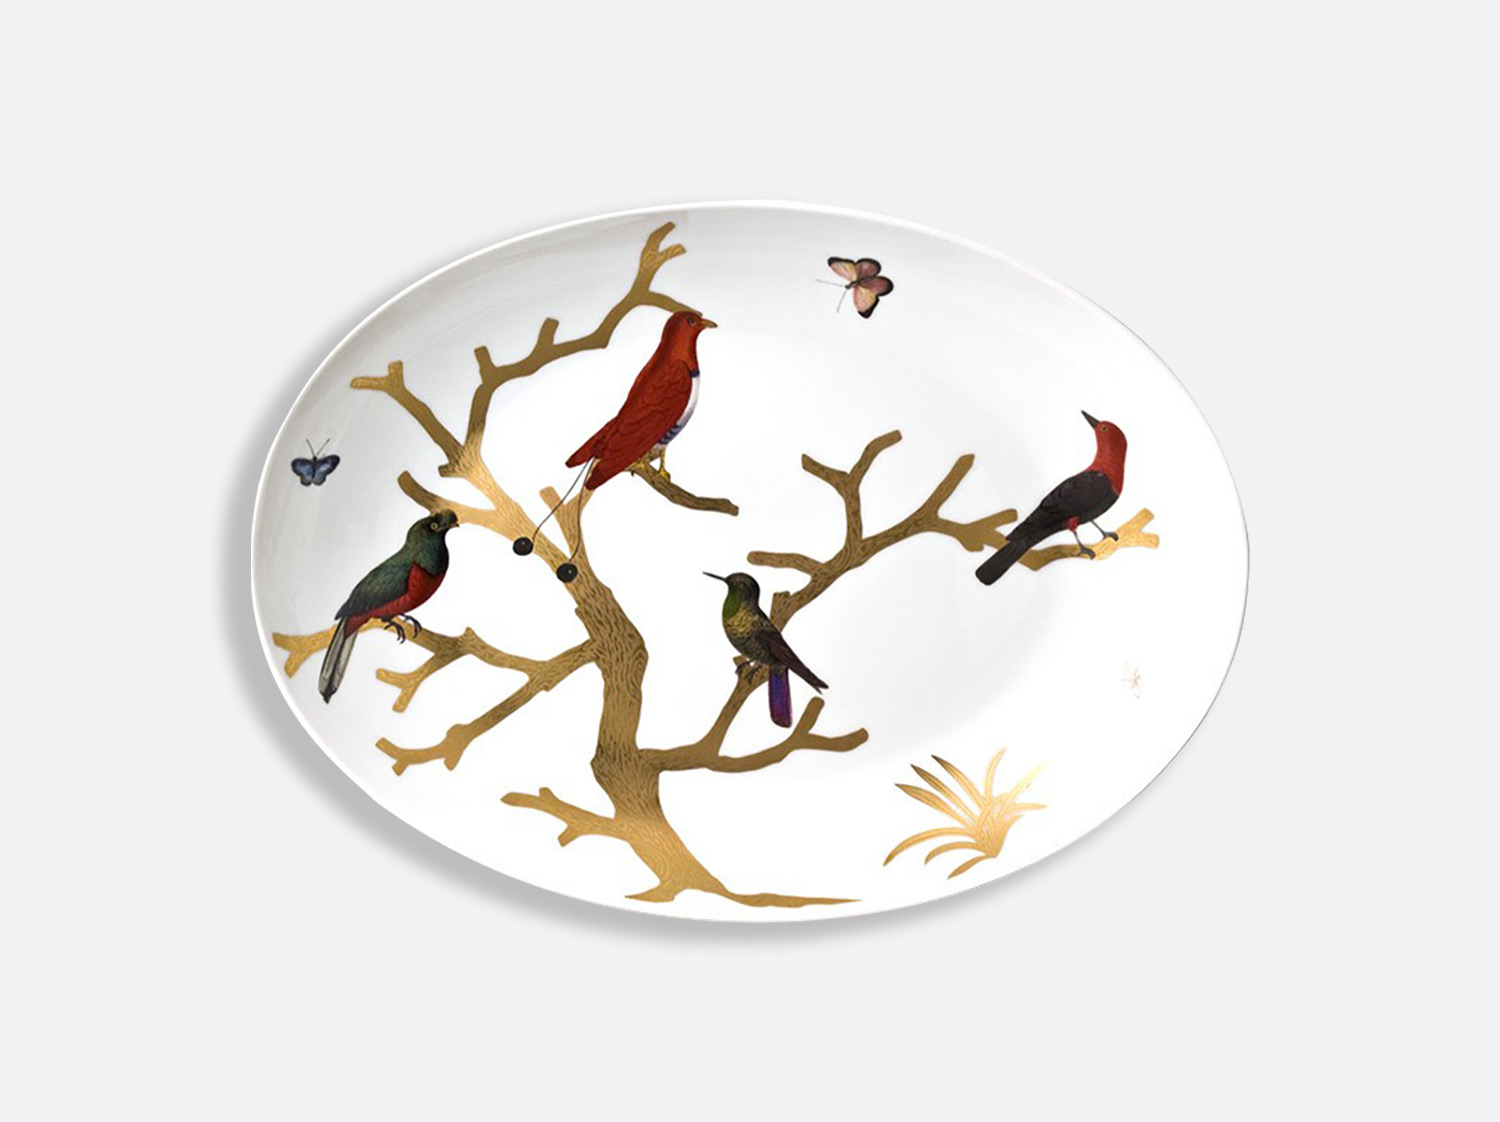 China Coupe oval platter 16" x 11.4" of the collection Aux oiseaux | Bernardaud